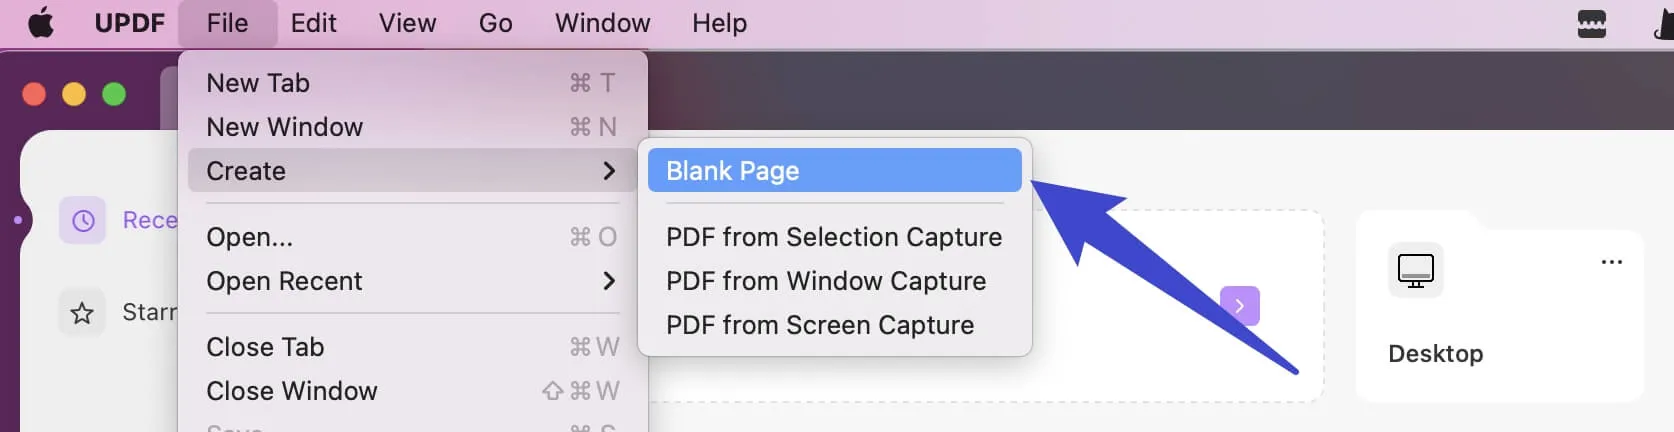 mac create pdf from images create blank page